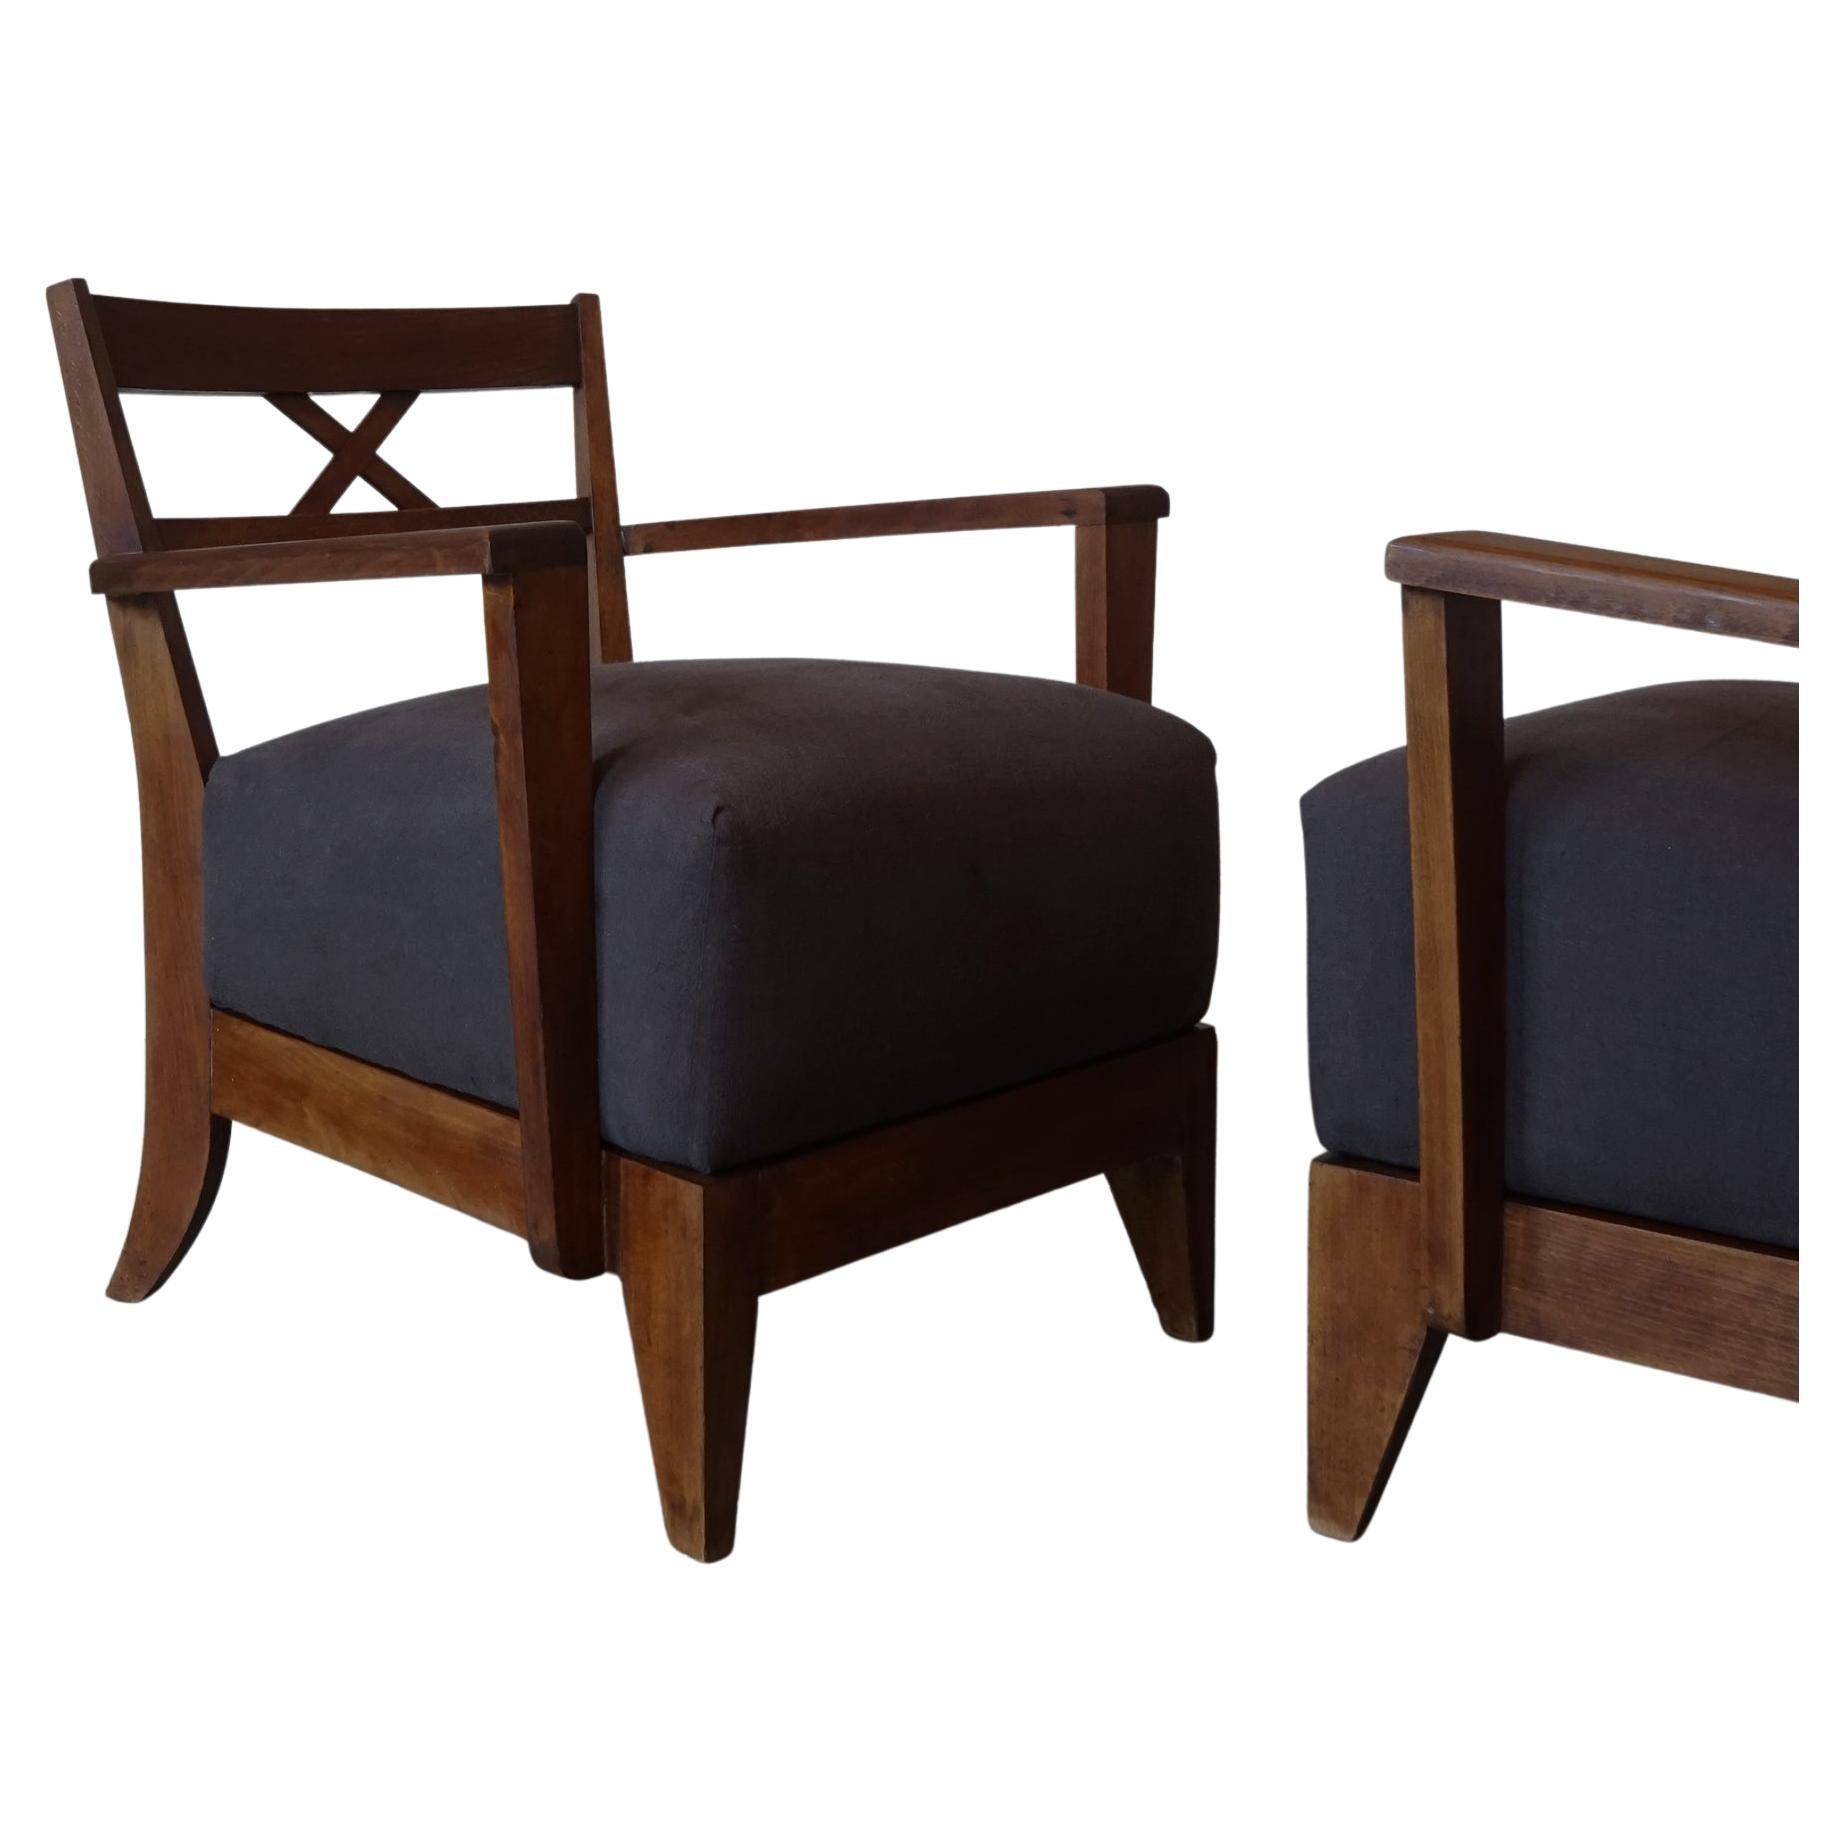 Vintage French Modernist Oak Lounge Chairs, 1940's, Belgian Linen Upholstery, 2 For Sale